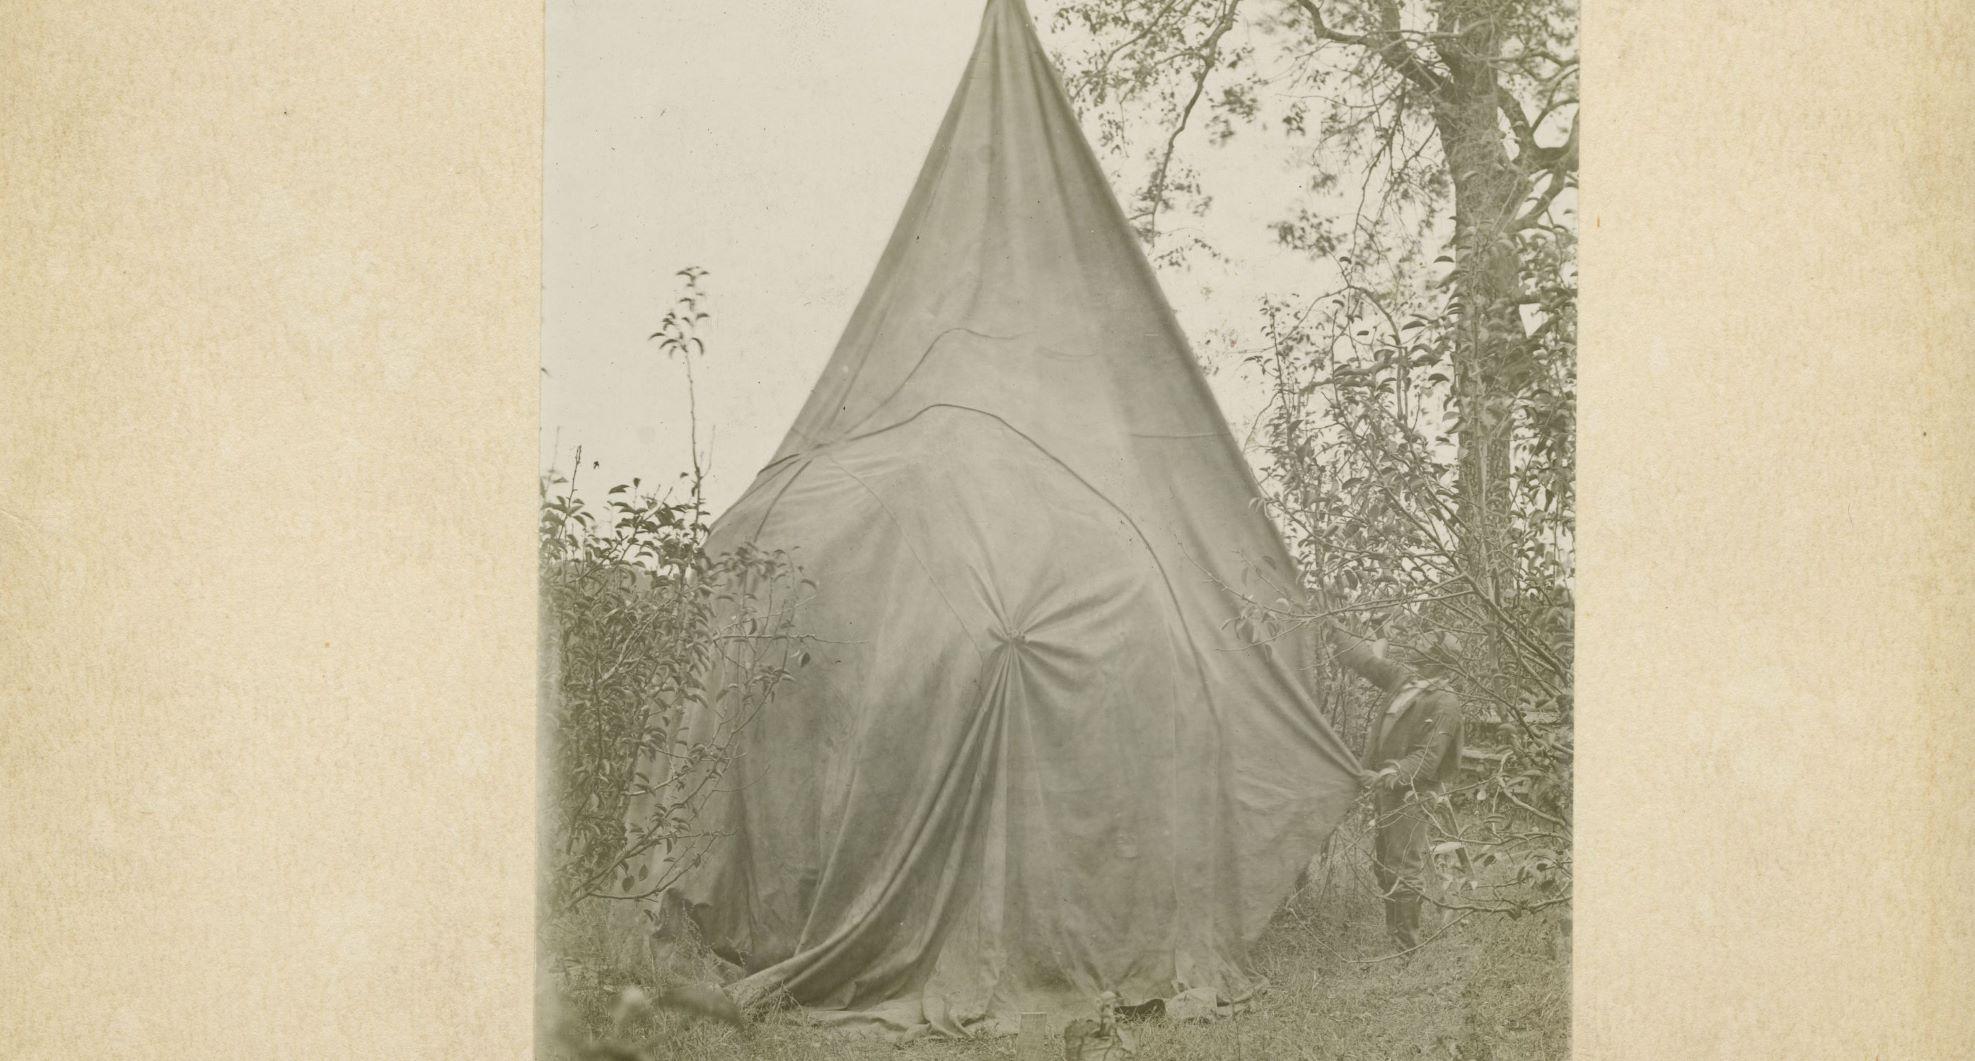 Black man putting sheet tent over a tree